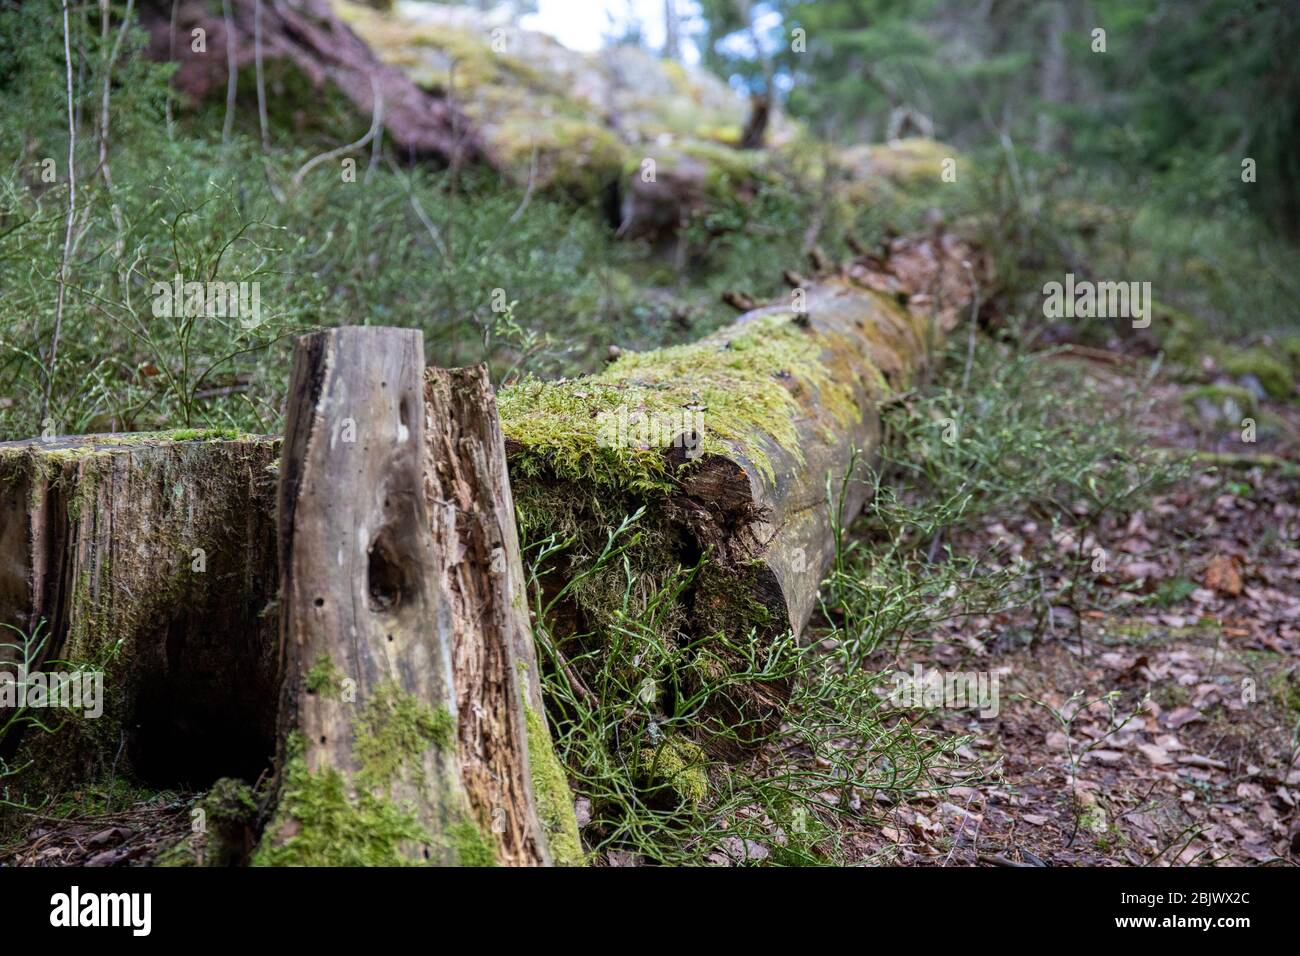 Decomposing fallen snag tree covered in moss Stock Photo